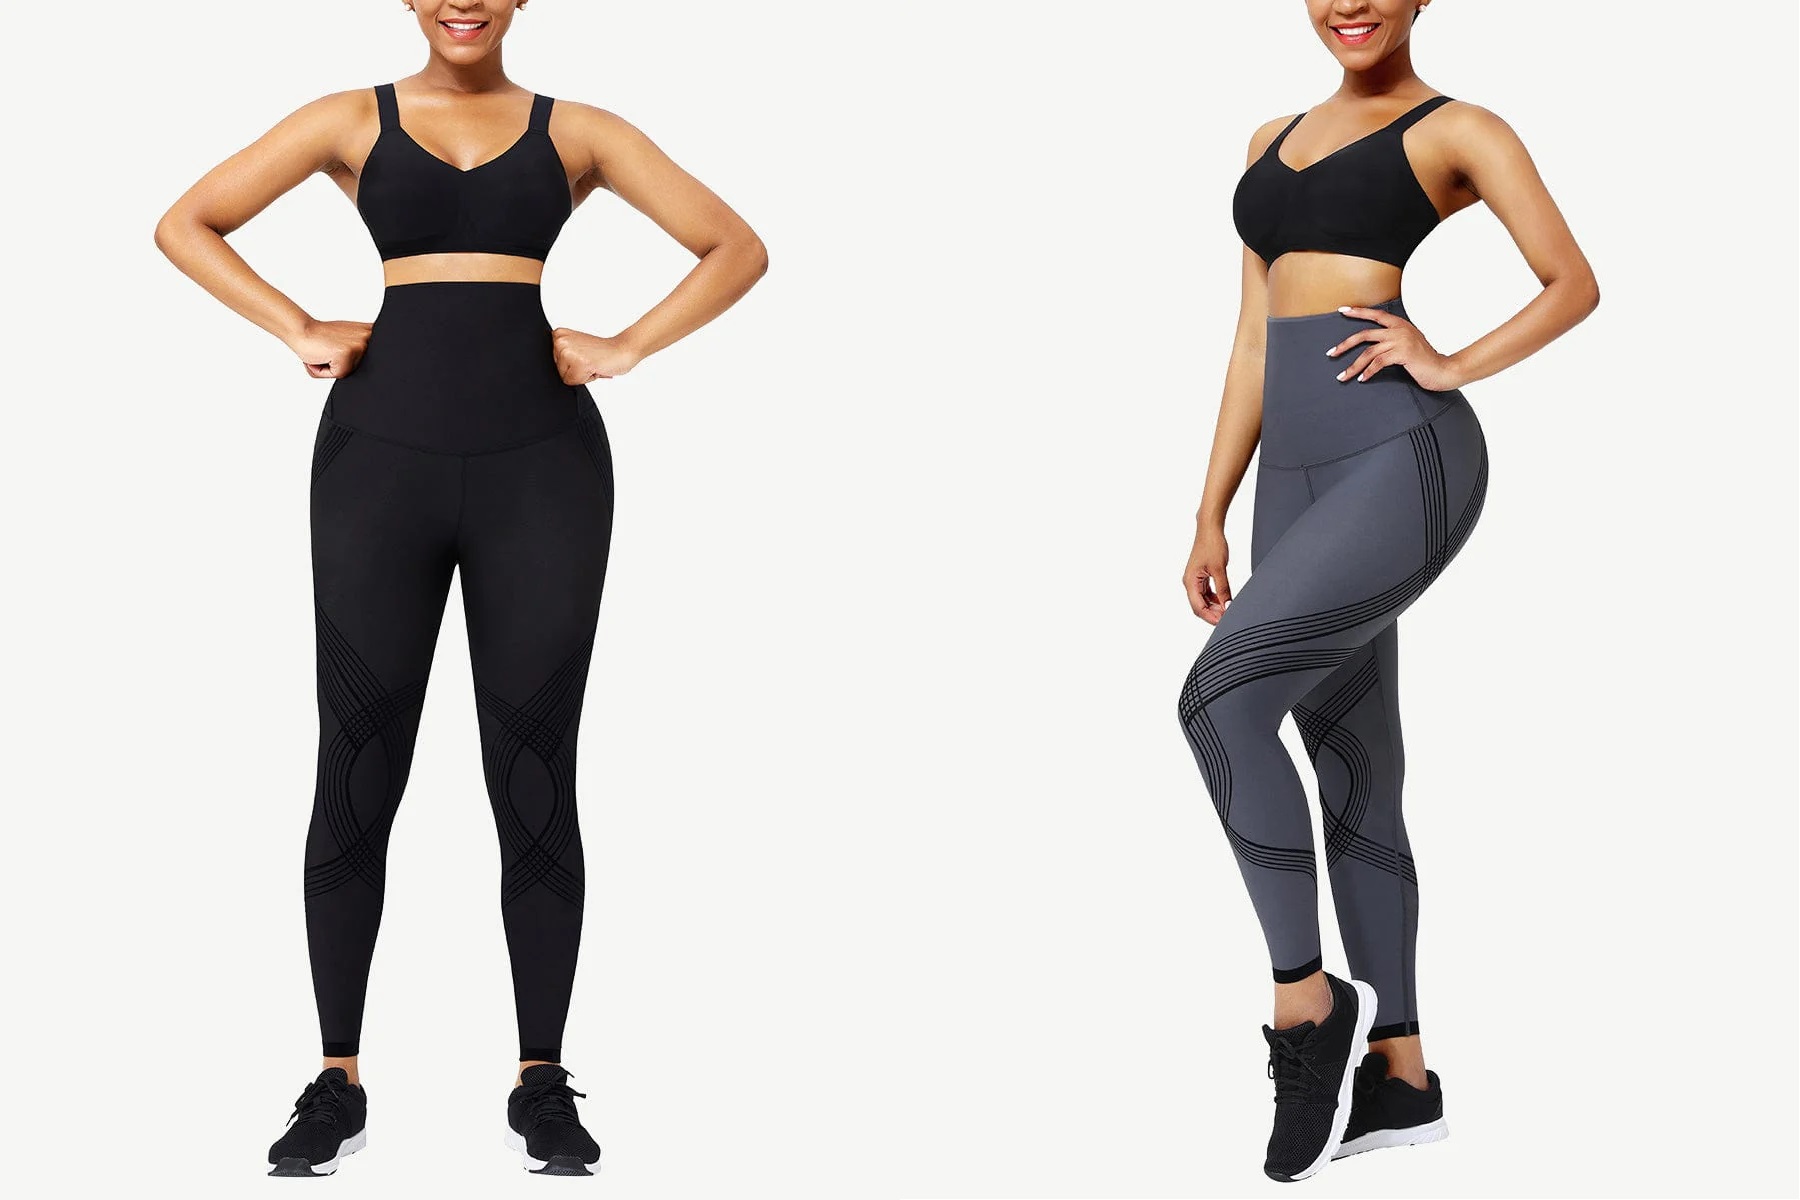 These Cult-Favorite Leggings Give Wearers A Fabulous Tummy Tuck Look!